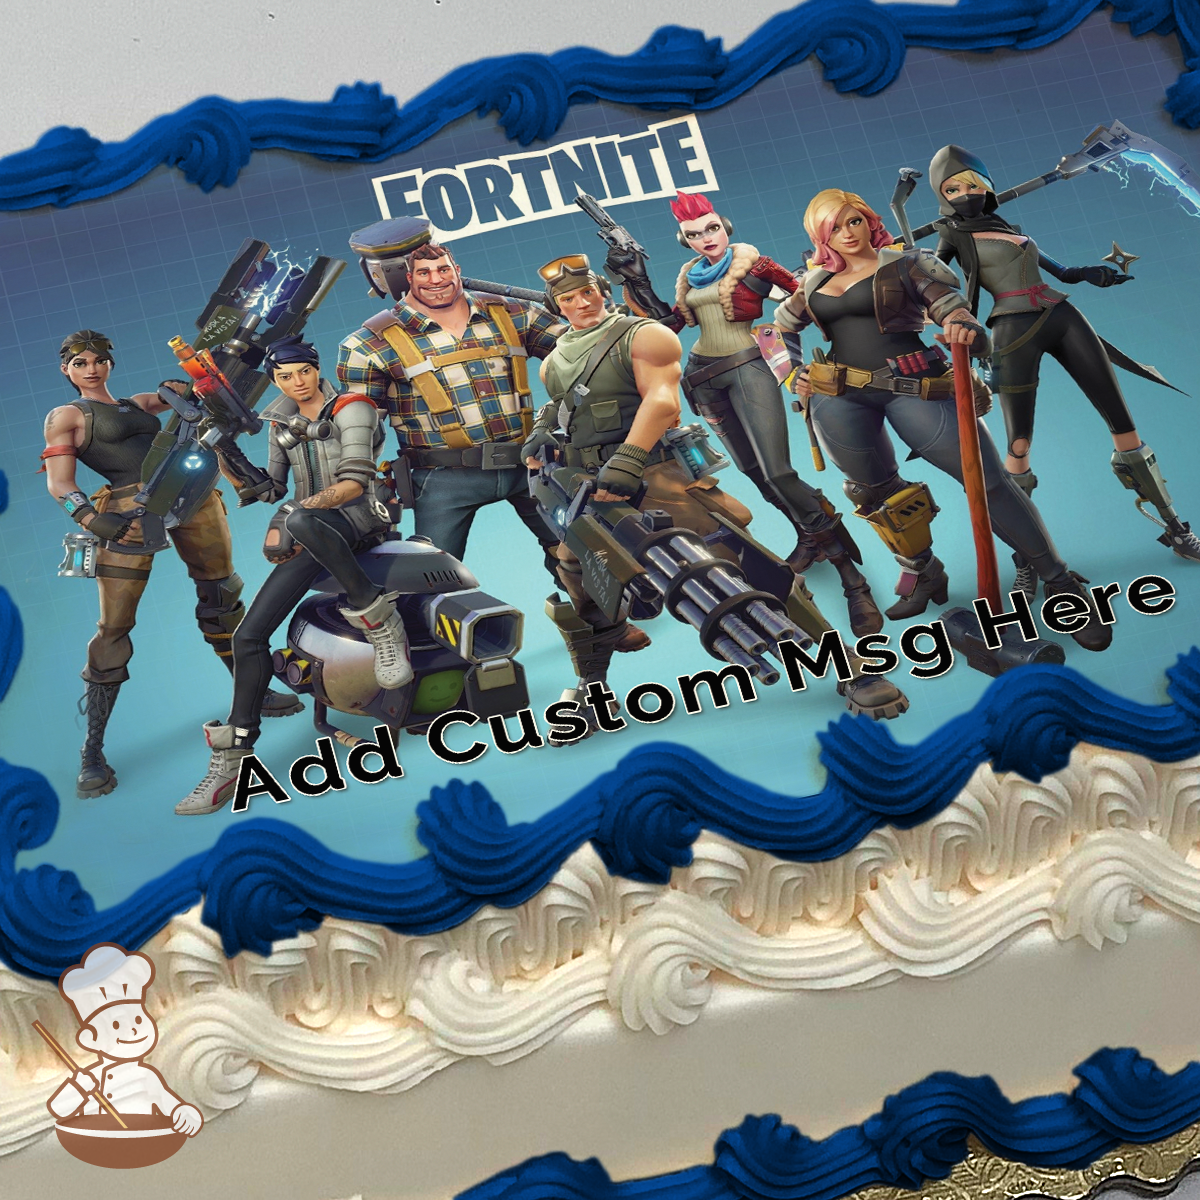 20 Fortnite Cake Ideas for an Epic Birthday Party in 2020